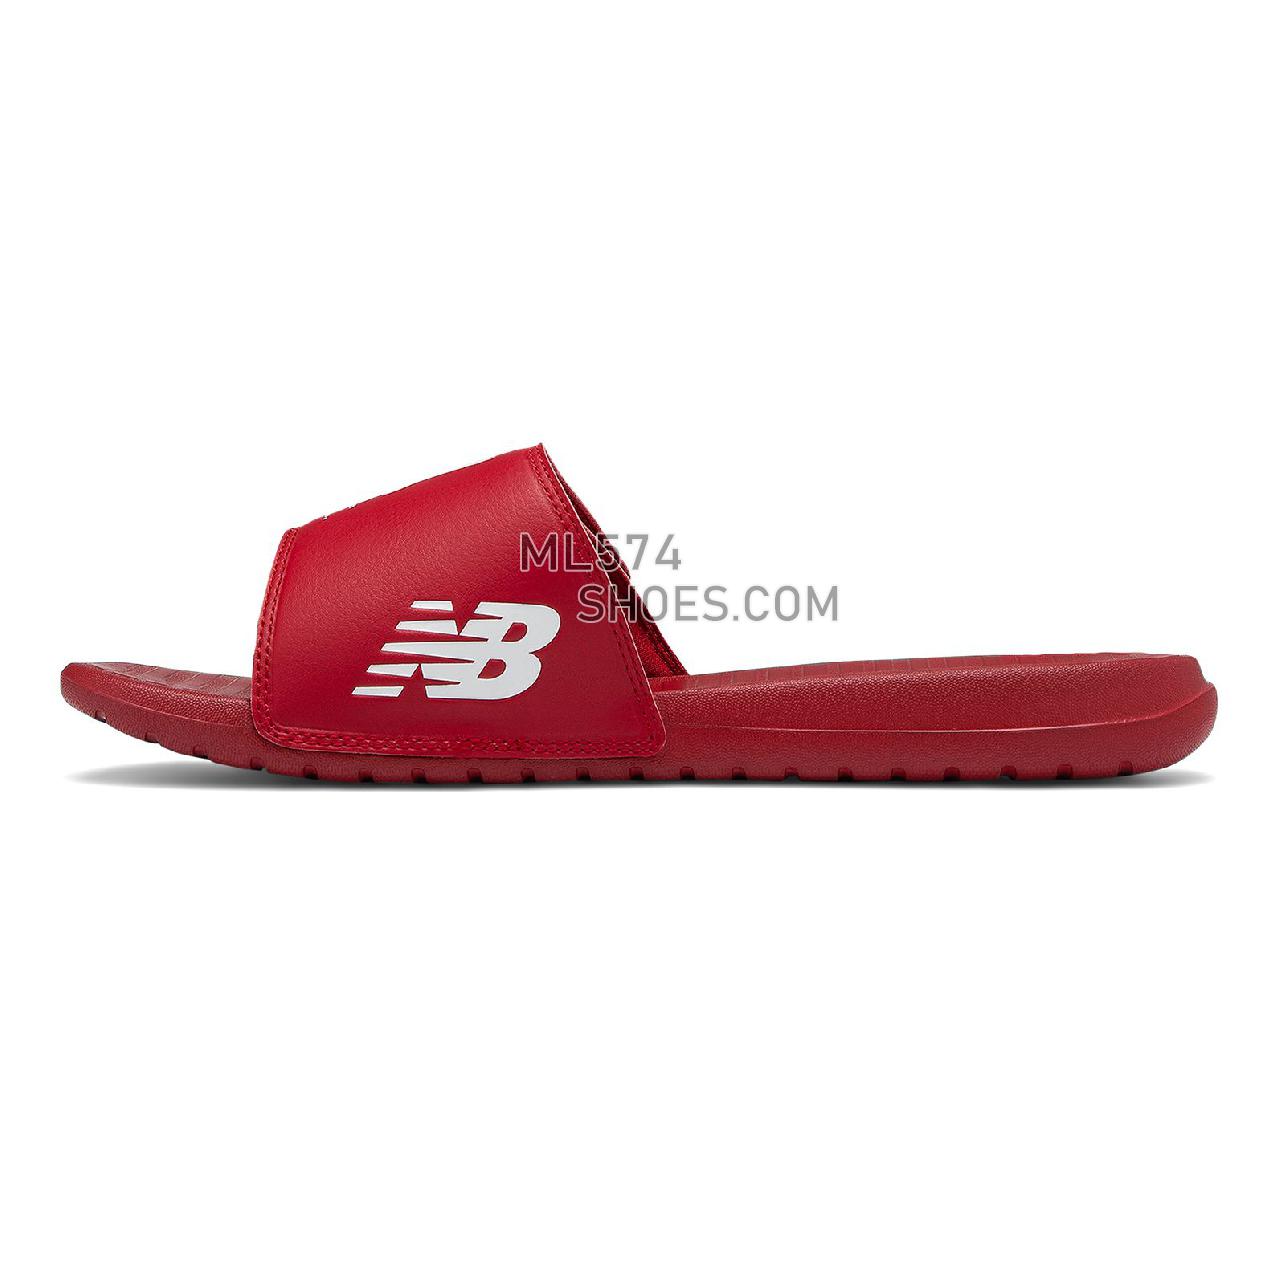 New Balance LFC Recovery Slide - Men's 230 - Sandals Red Pepper with White - SDL230RW